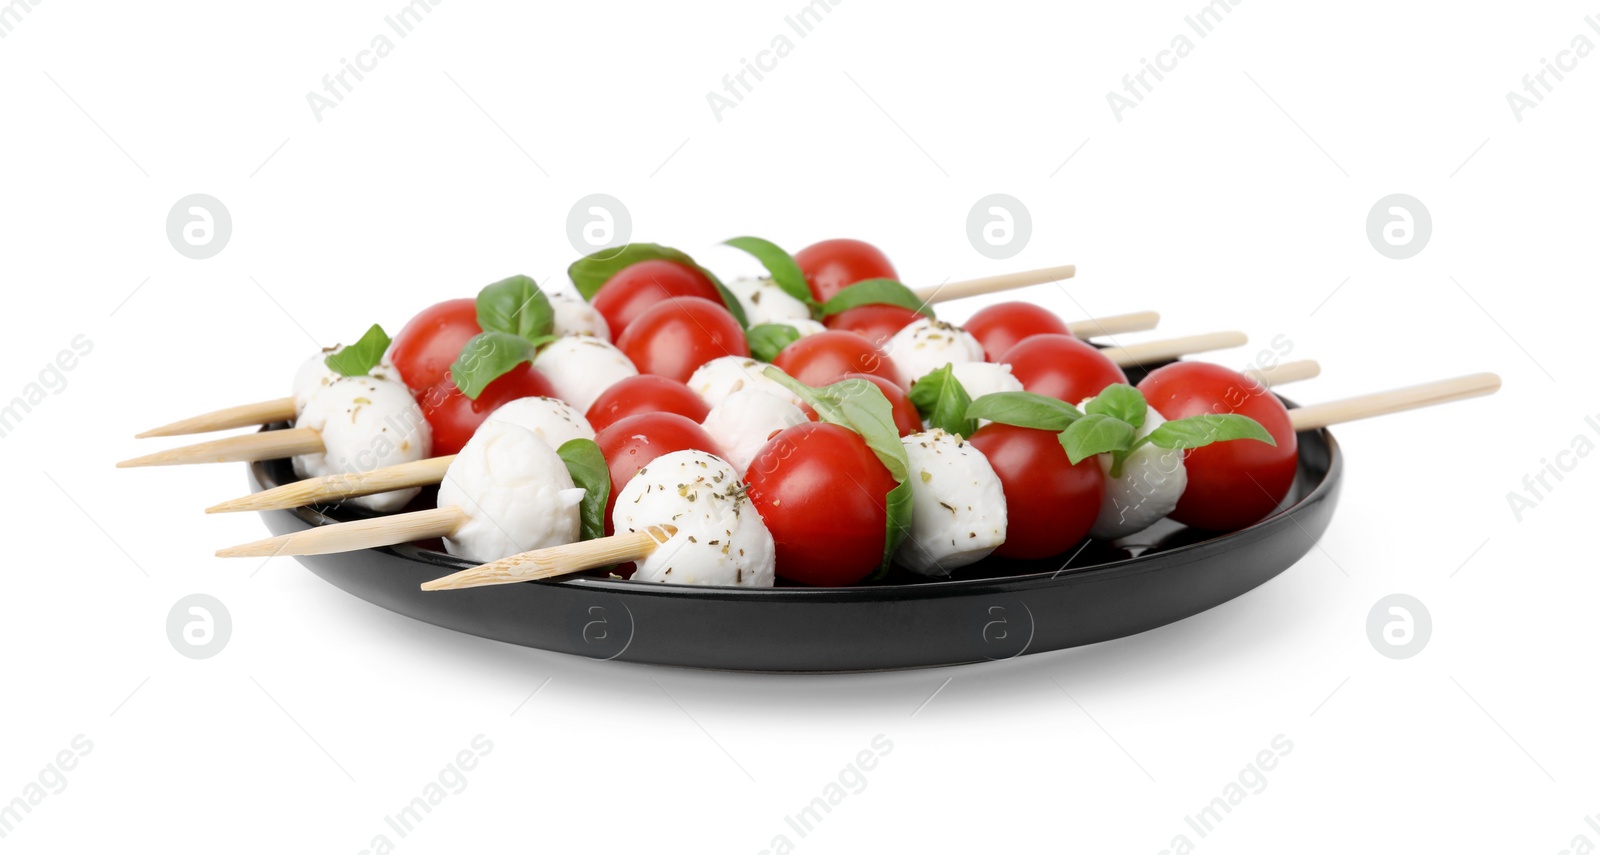 Photo of Plate of Caprese skewers with tomatoes, mozzarella balls, basil and spices isolated on white